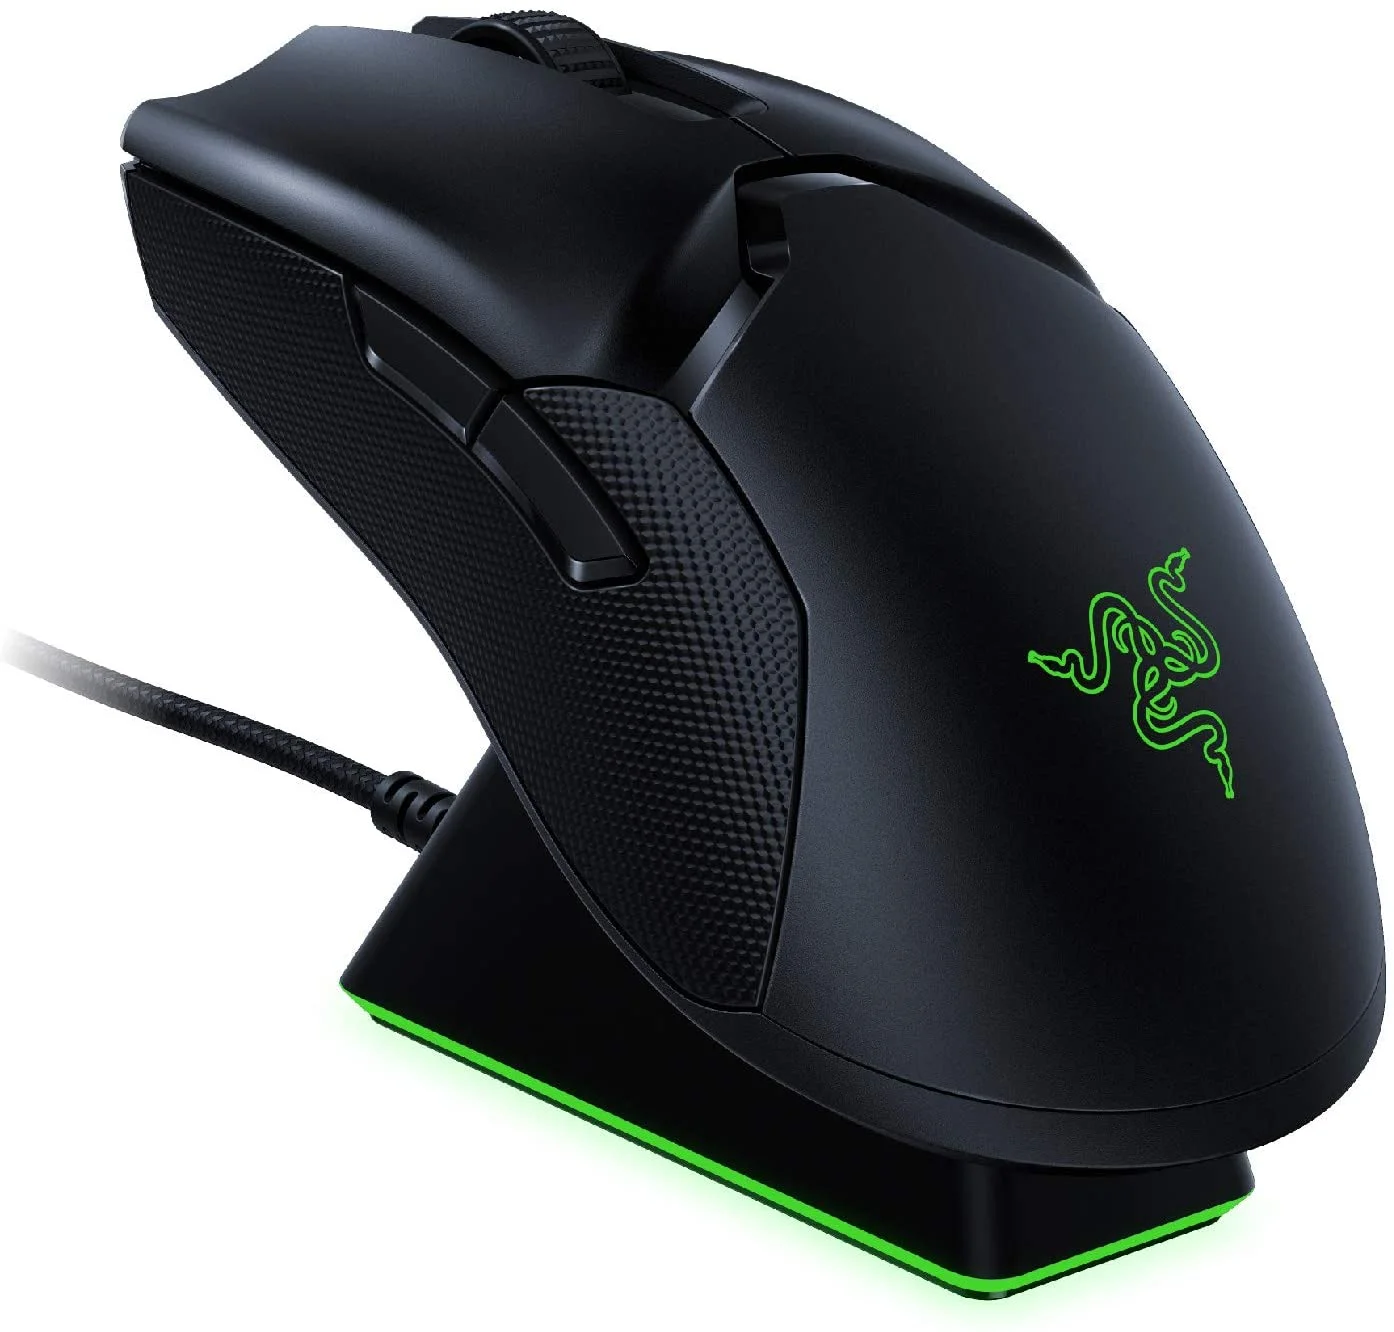 BEST WIRELESS GAMING MOUSE